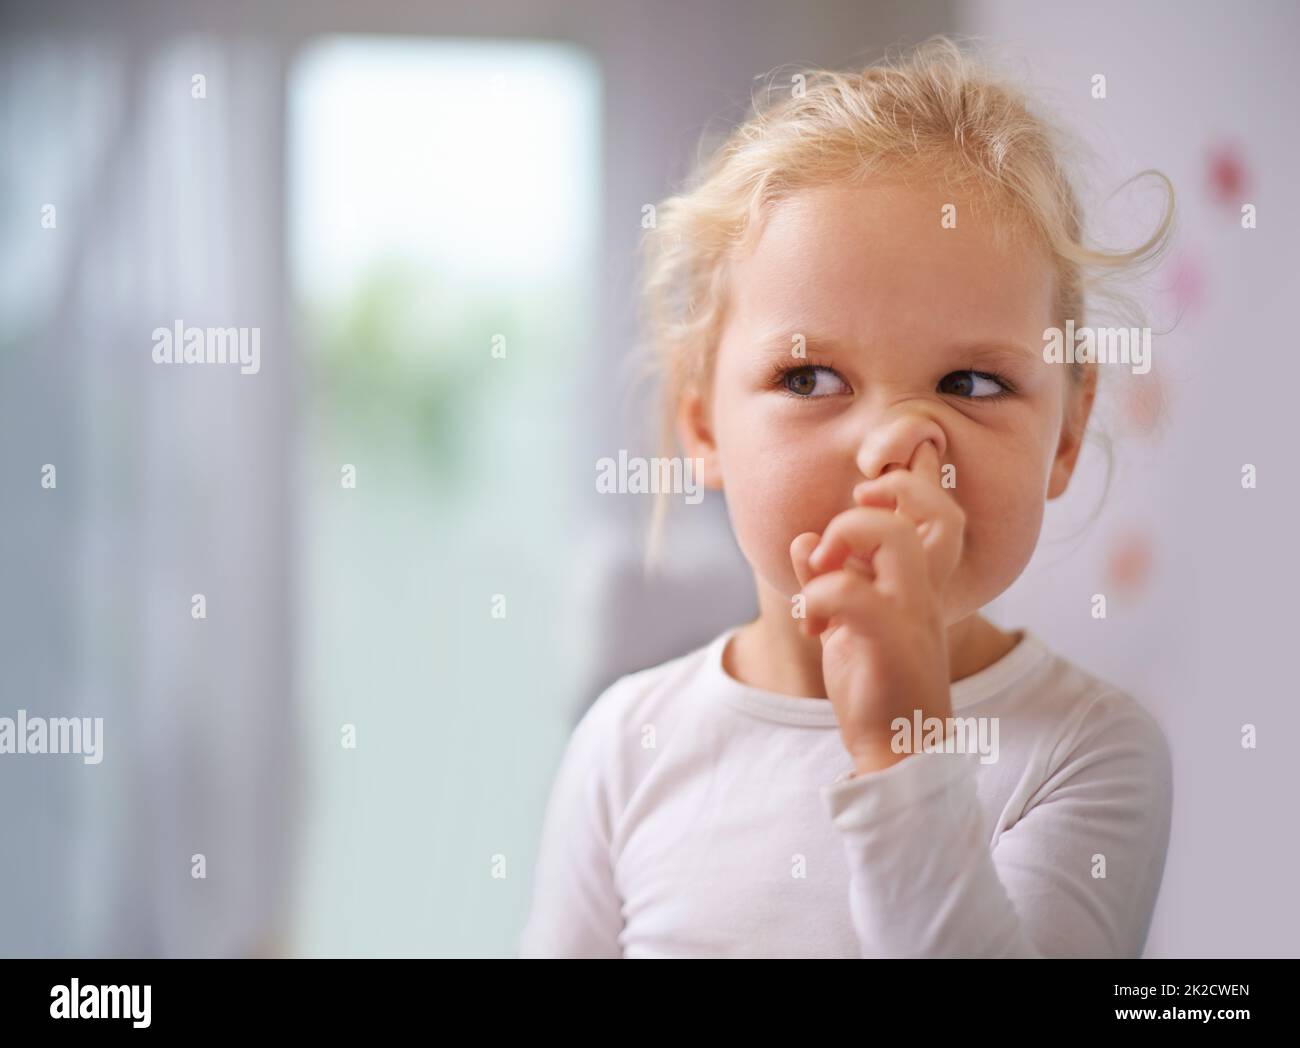 Digging for gold. A little girl picking her nose. Stock Photo